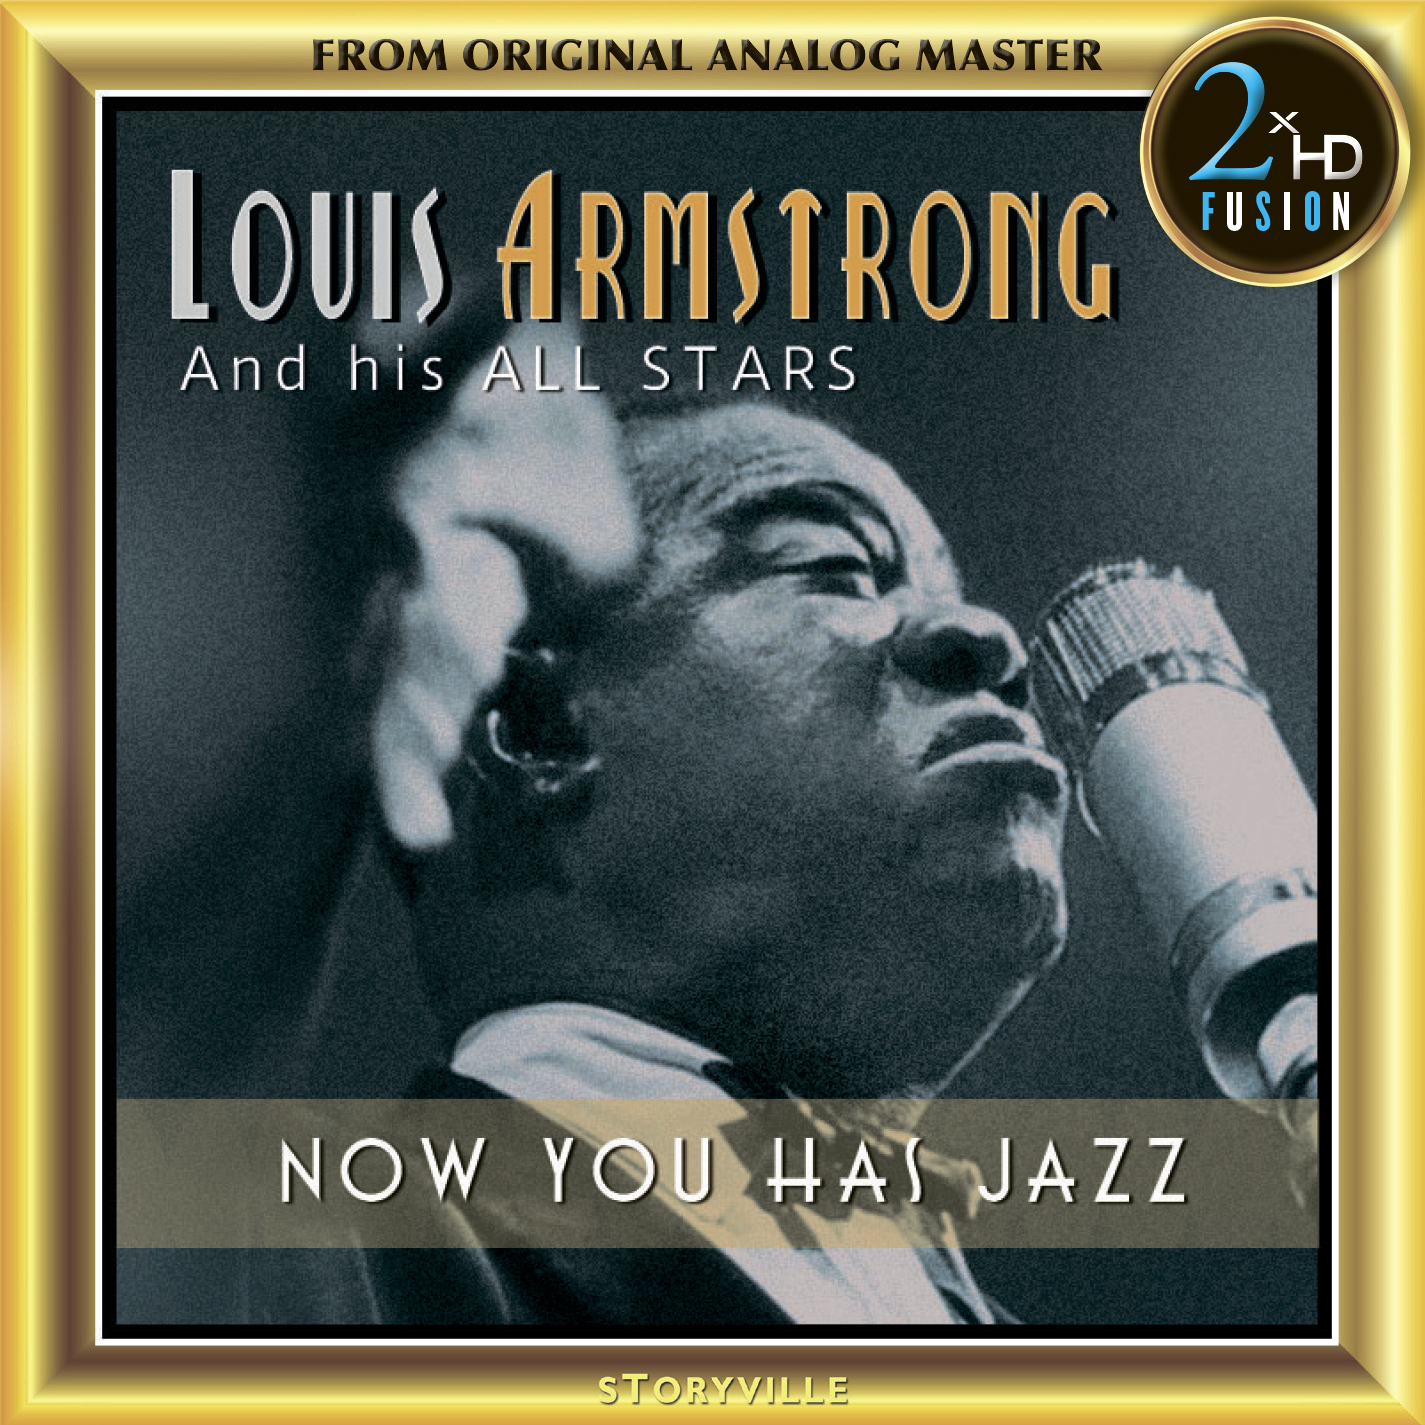 Louis Armstrong – Now You Has Jazz (2018) [HDTracks DSF DSD128/5.64MHz + FLAC 24bit/96kHz]